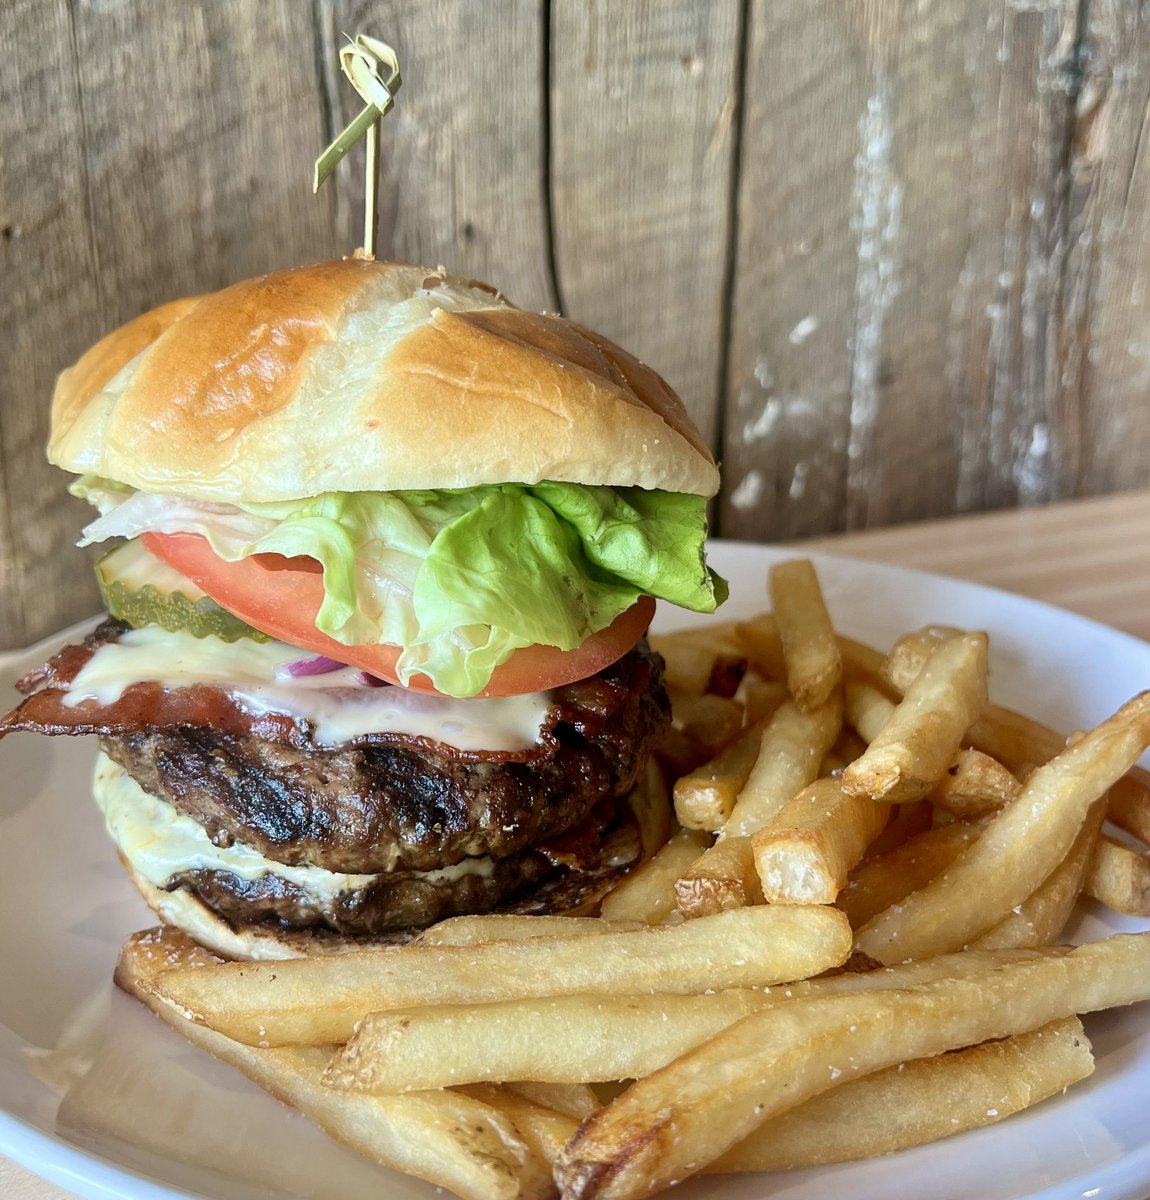 What should you be ordering on both #NationalBeefBurgerDay and #NationalHamburgerDay during #NationalBurgerMonth?  How about a Roadside Double Bacon Cheeseburger!
@NewEnglandInfo @NHLRA @NHBR  @ManchInkLink @wmur9 @luvMHT 
#manchesternh #burgers #lunch #burgertime #newhampshire